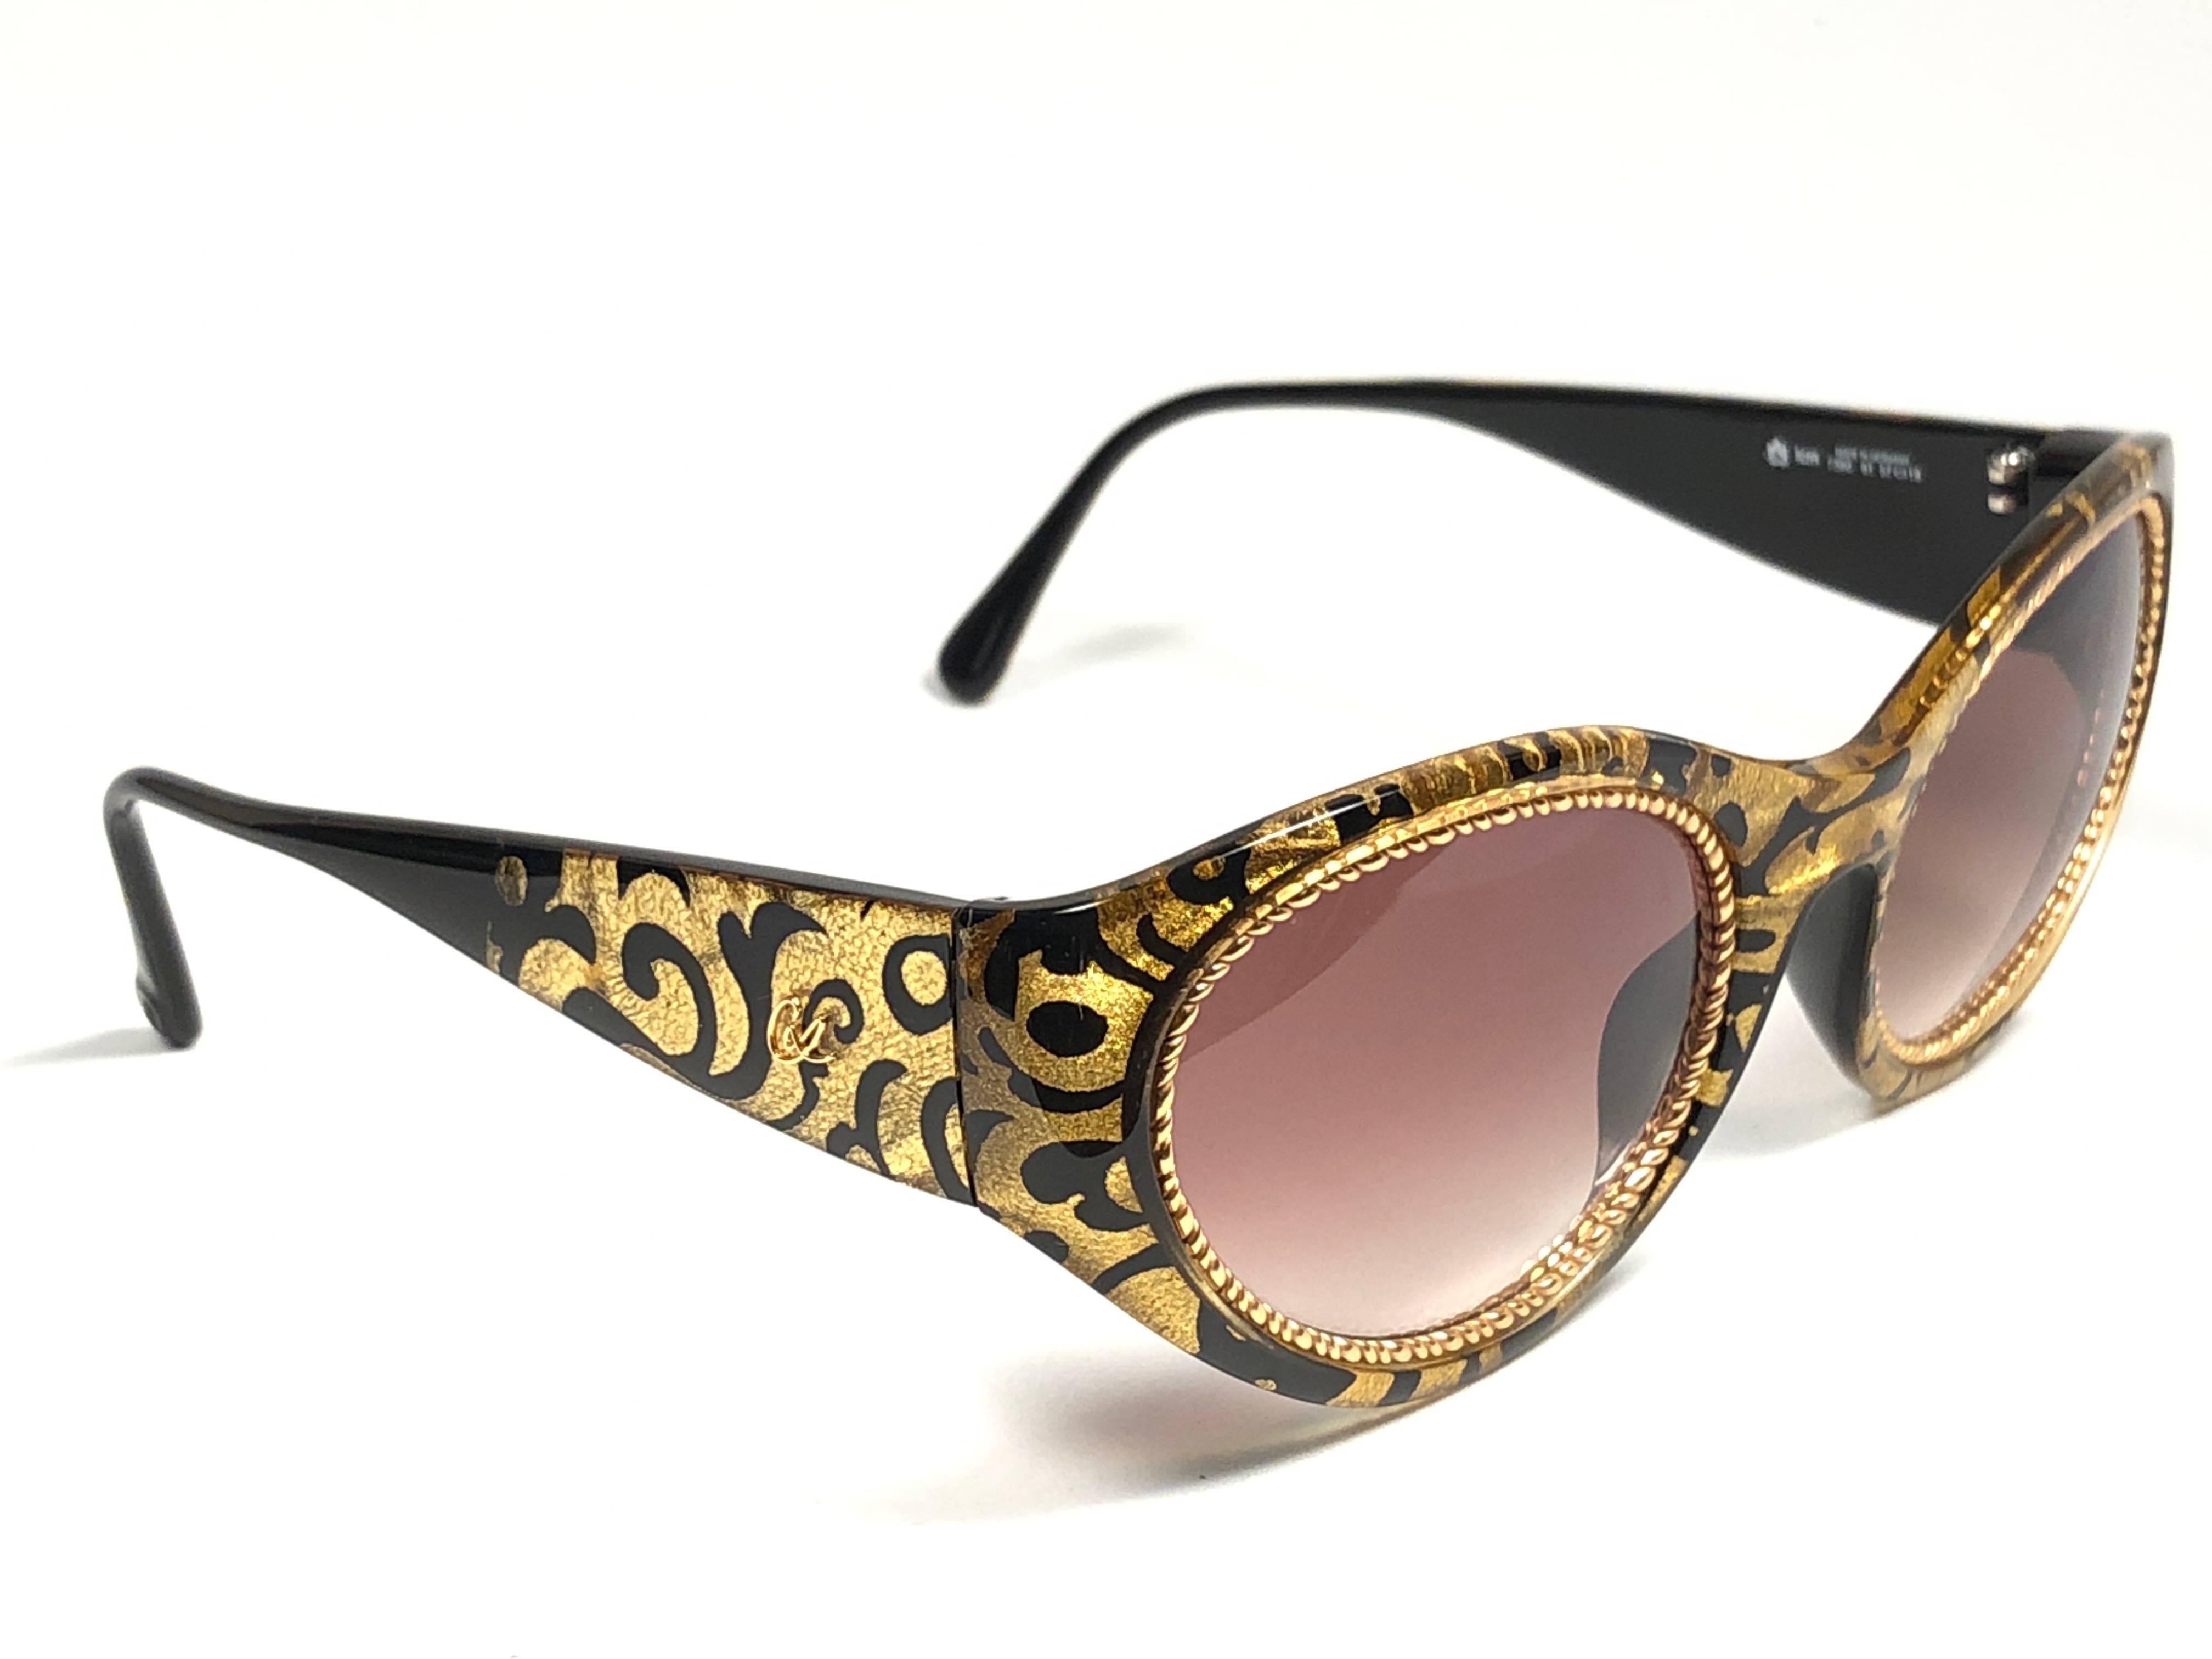 Rare pair of New vintage Christian Lacroix sunglasses.   

Black & gold baroque pattern frame holding a pair of spotless amber mirror lenses. The interior logo has fade due to storage.

New, never worn or displayed. 

Made in France.